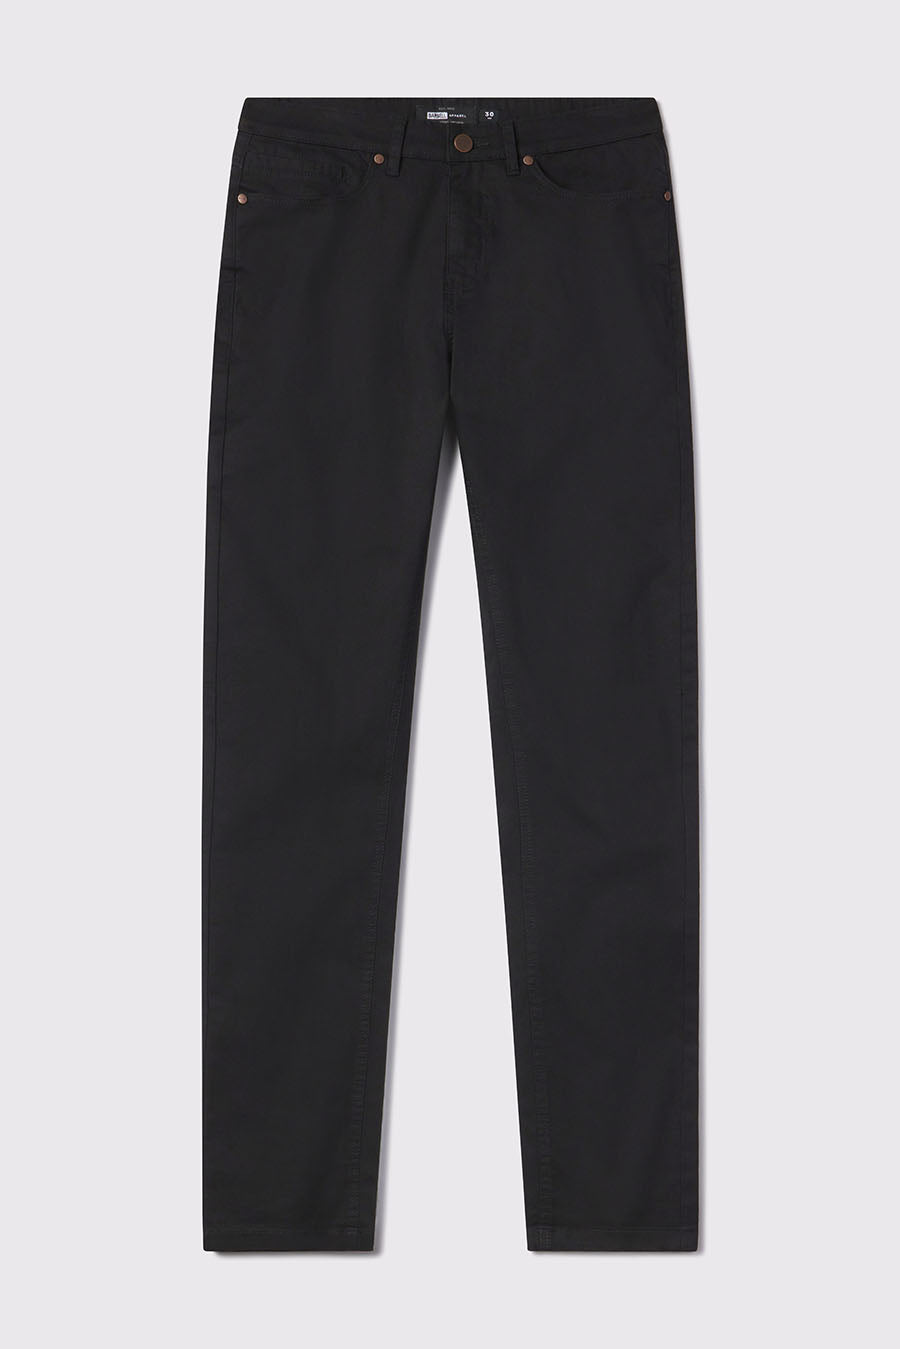 Athletic Fit Chino Pant 2.0 - Black - photo from front flat lay #color_black